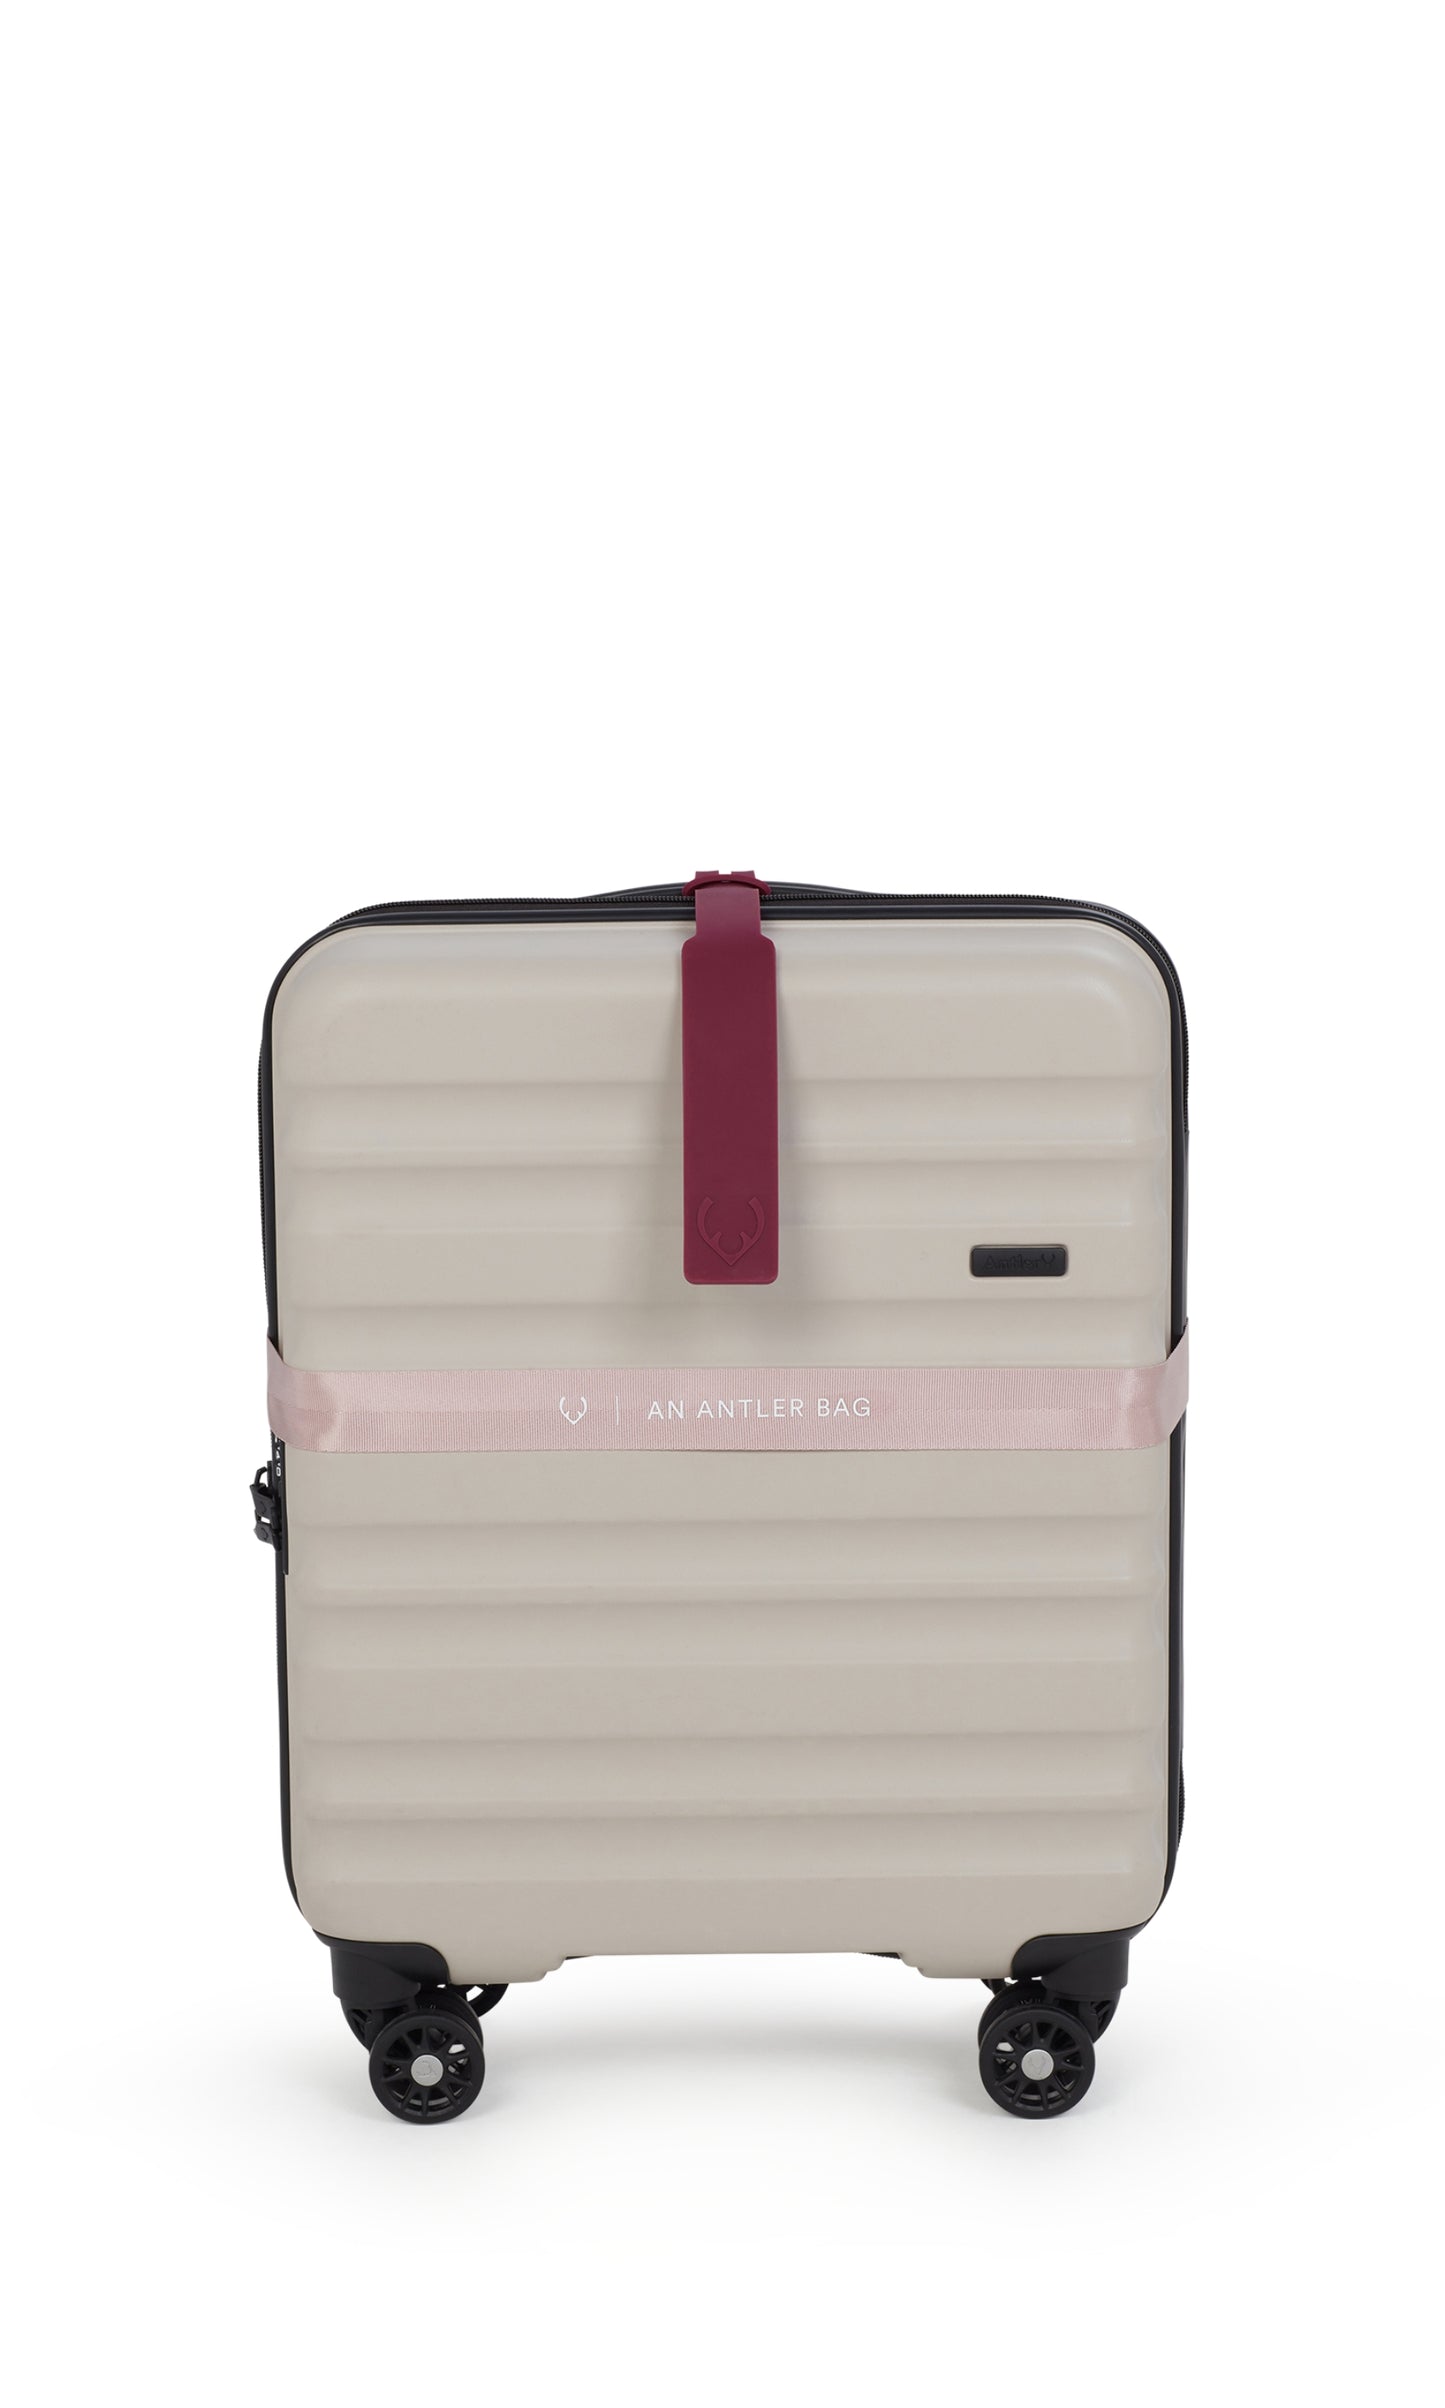 Luggage strap in moorland pink